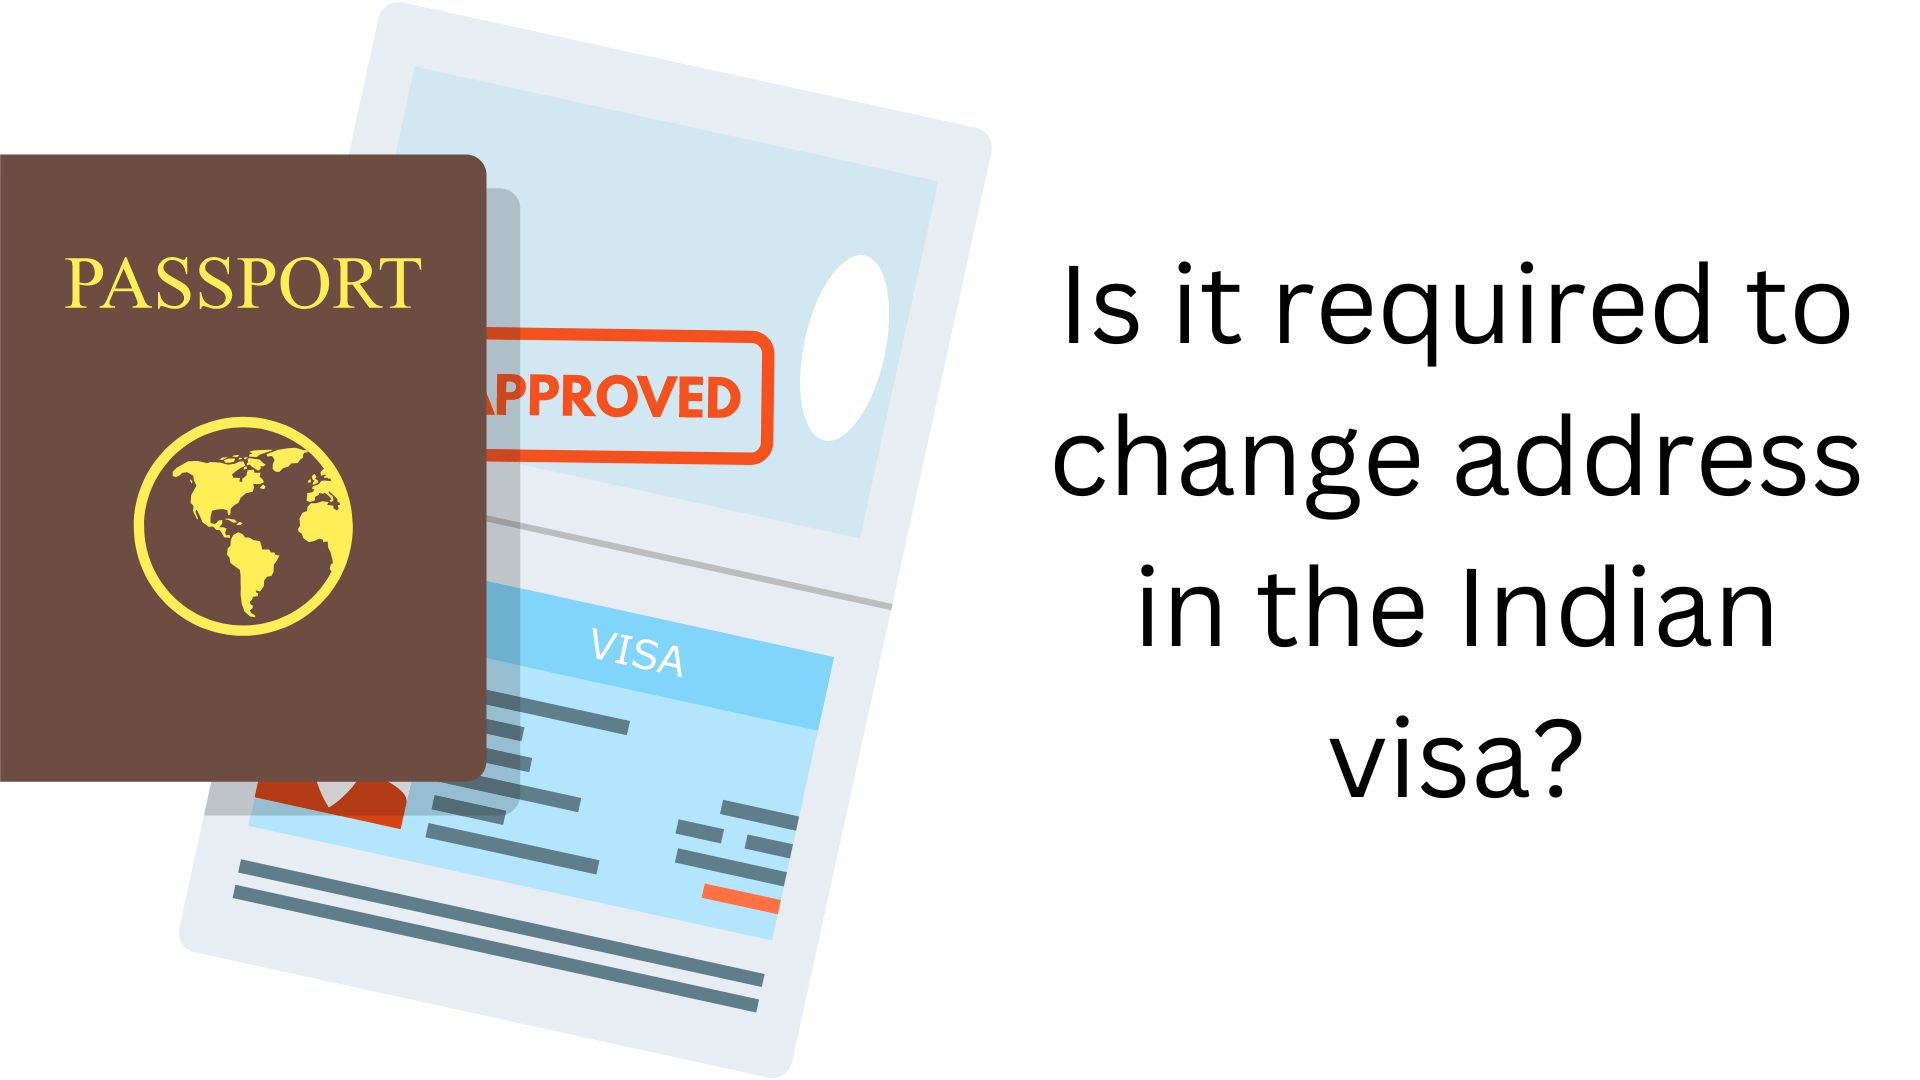 Is it required to change address in the Indian visa